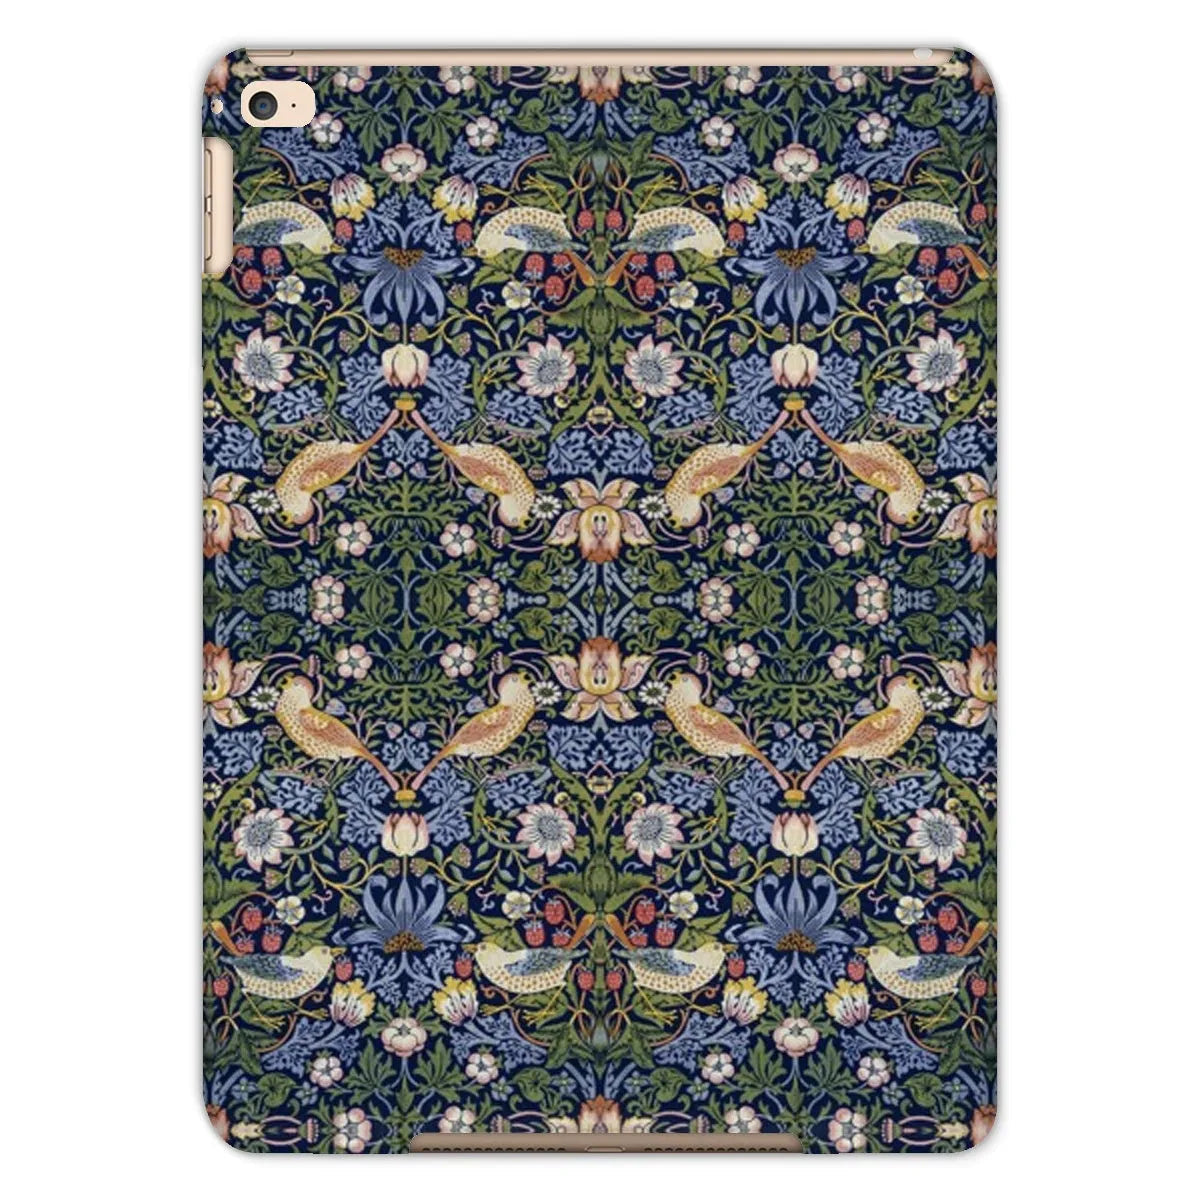 Strawberry Thief By William Morris Ipad Case - Air 2 Toby Leon